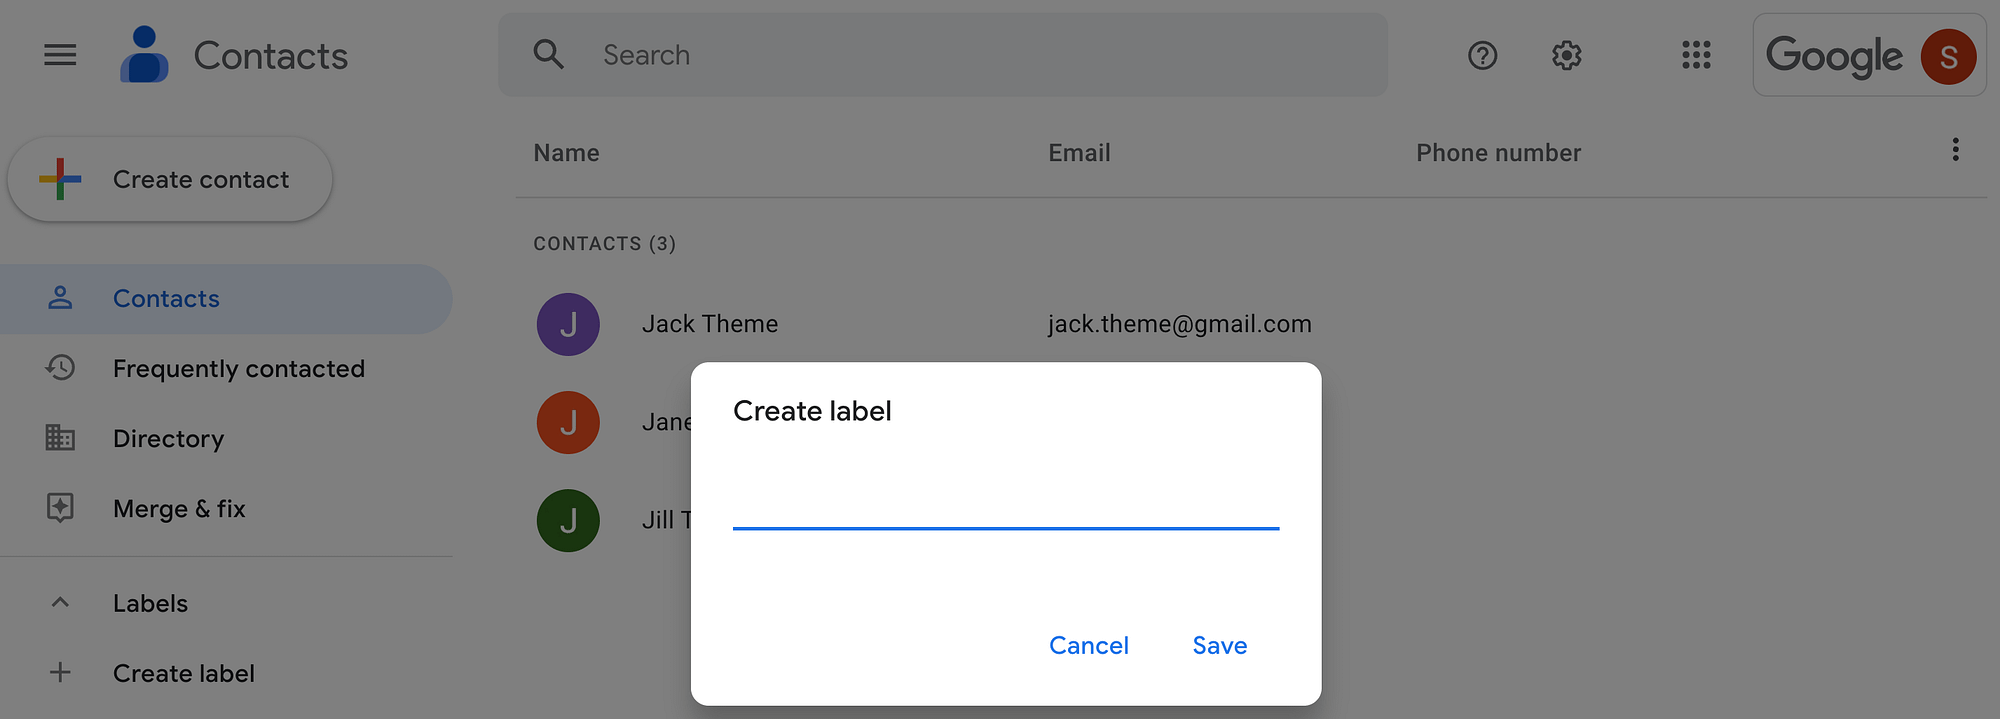 Create label in Google Contacts.